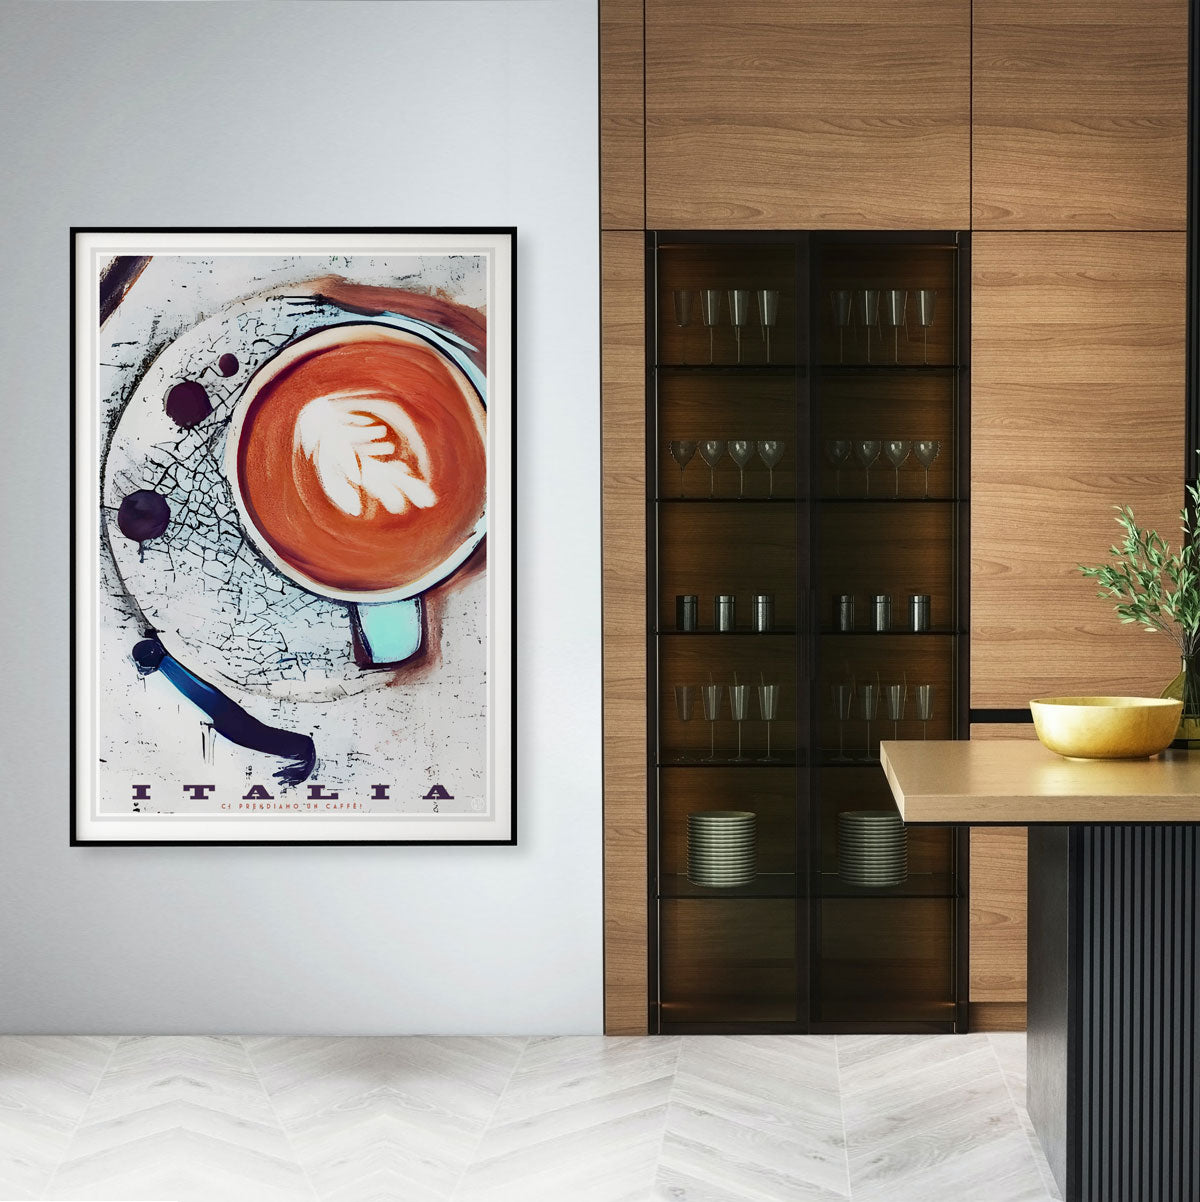 Cappuccino Italy retro vintage print from Places We Luv